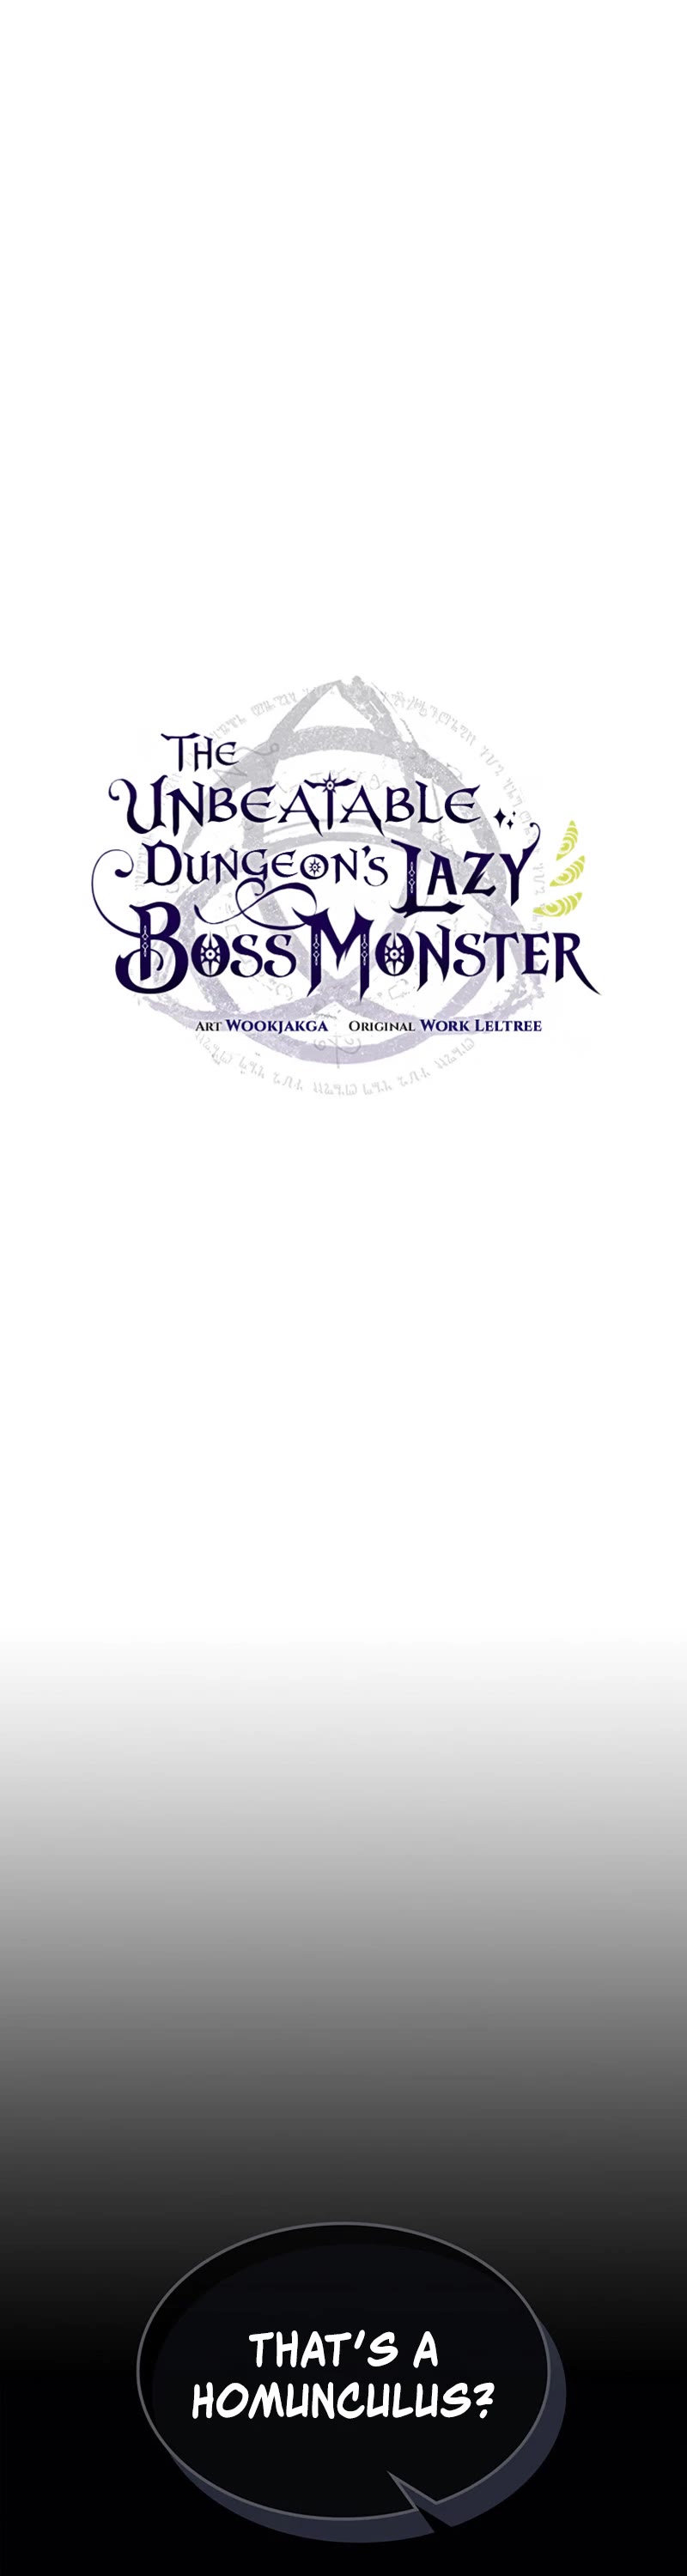 The Unbeatable Dungeon's Lazy Boss Monster - Page 2